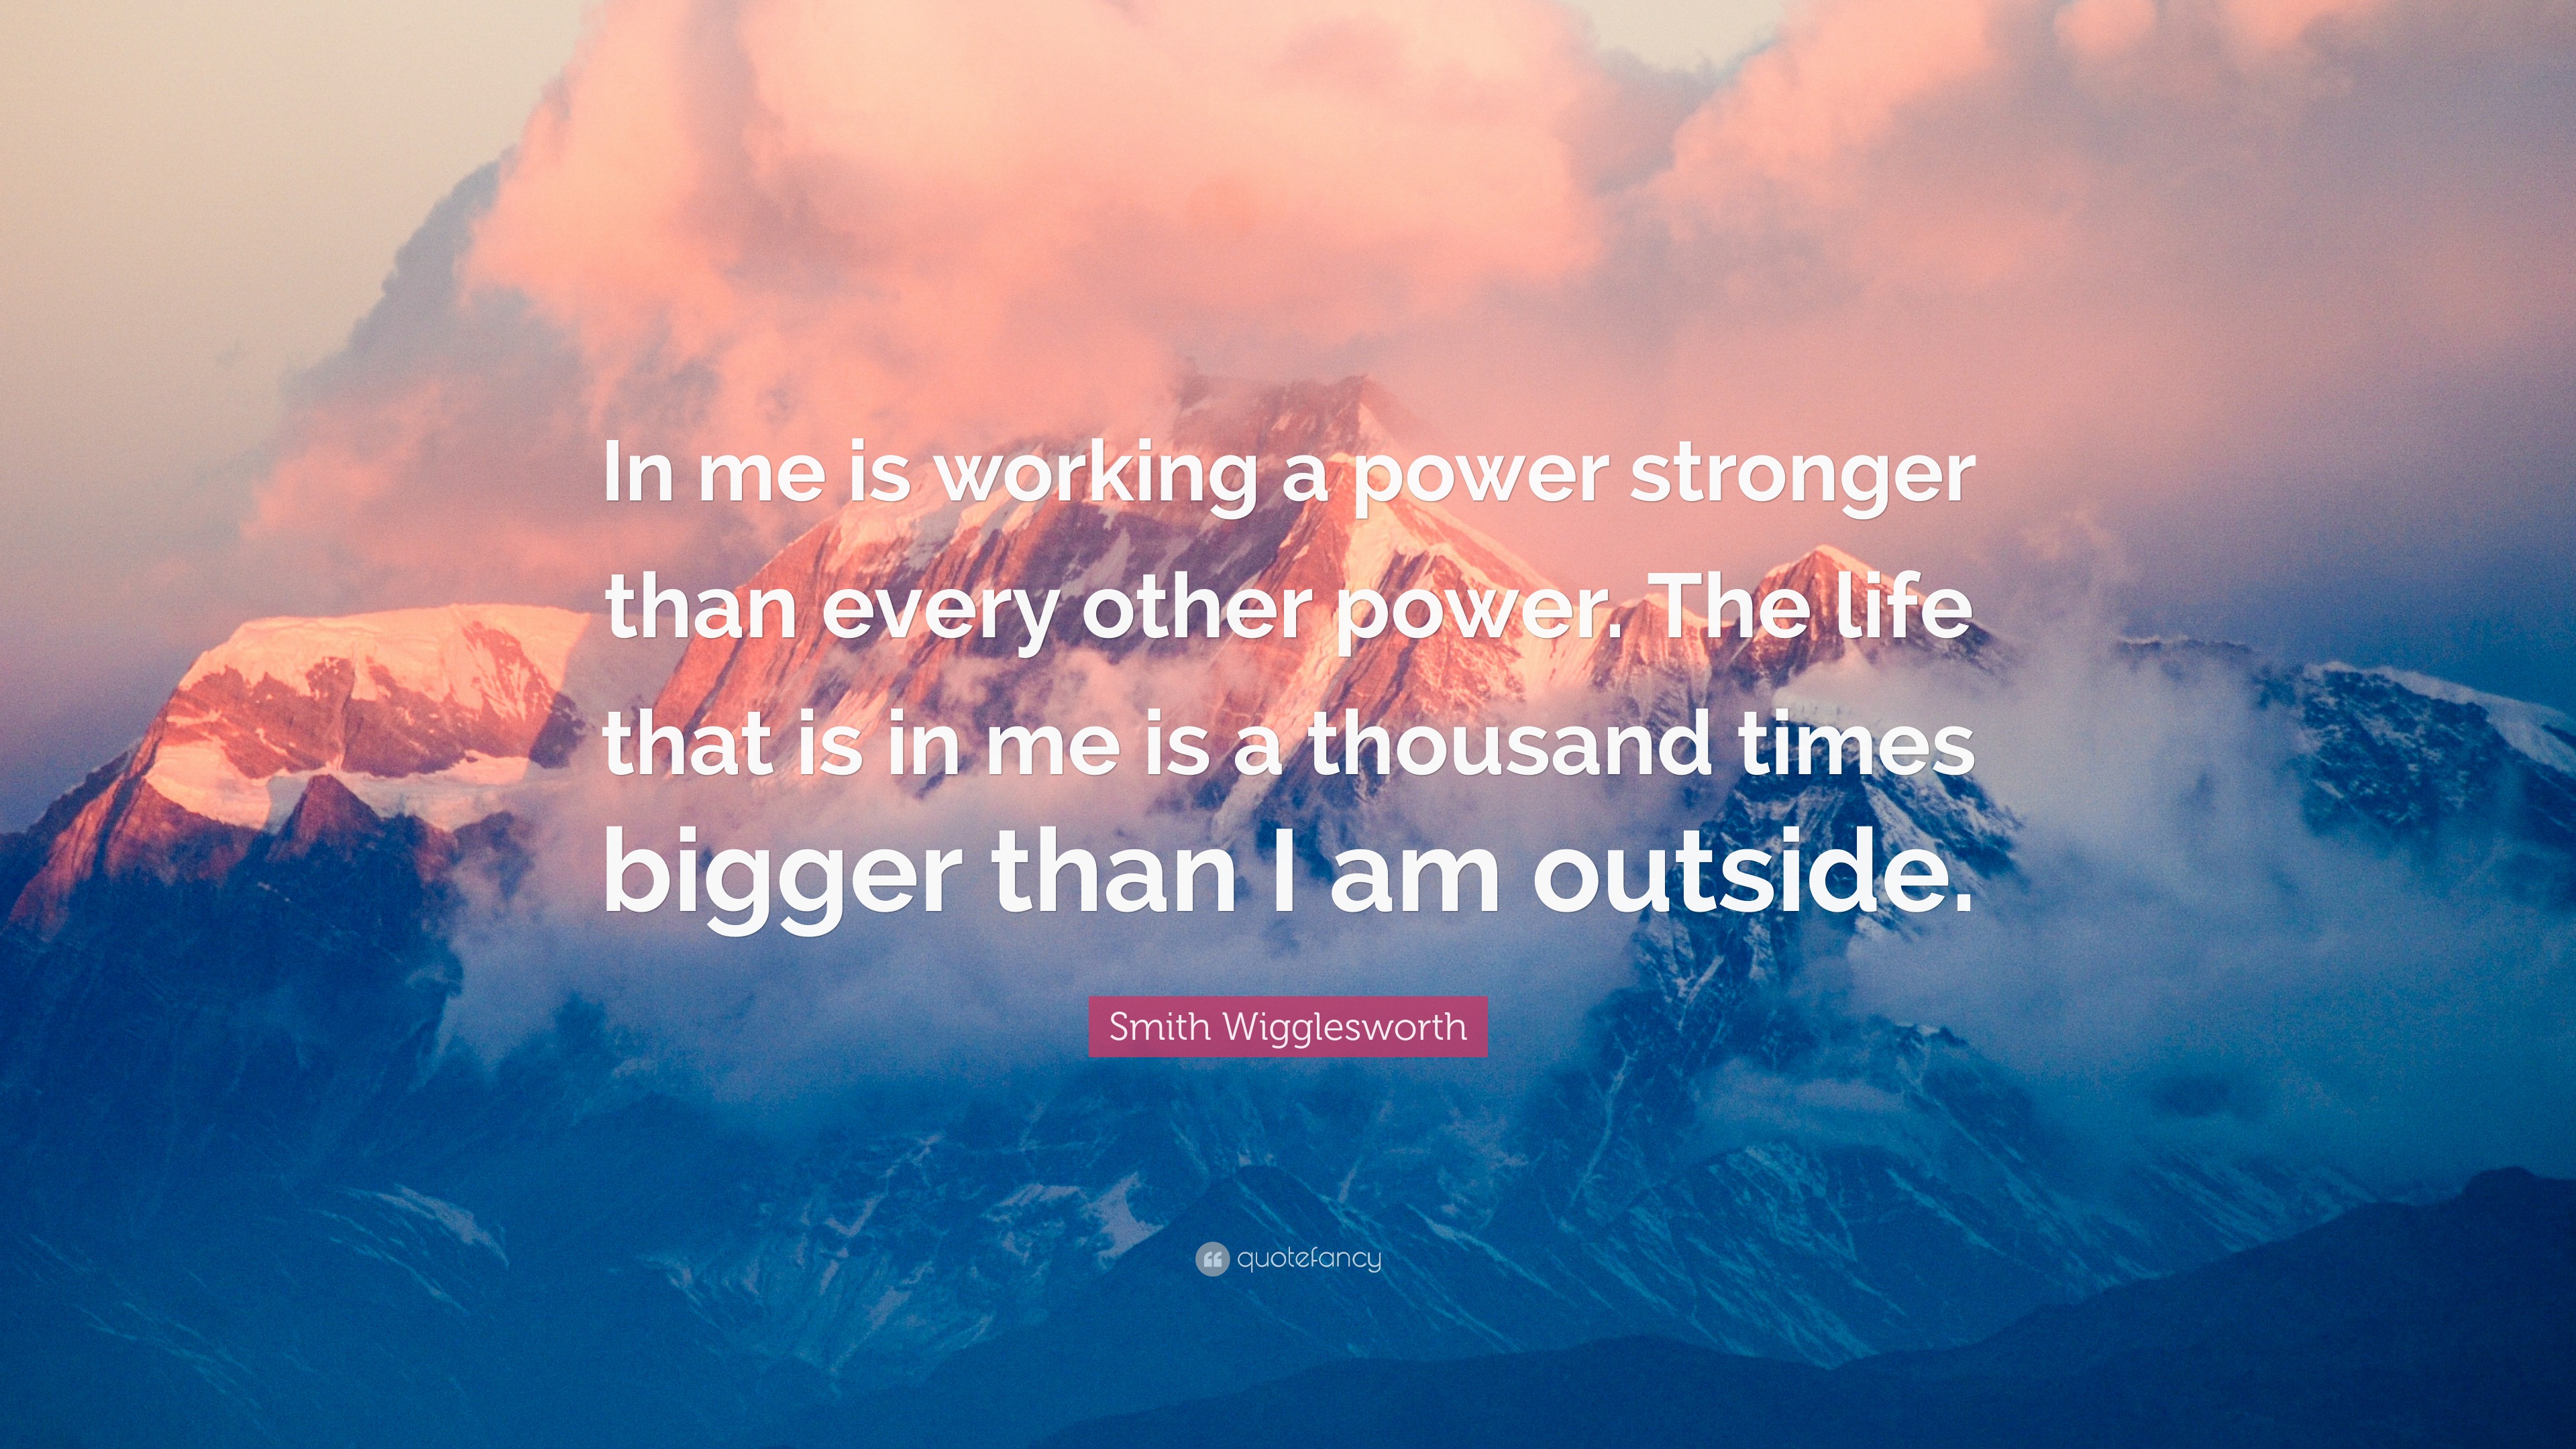 Smith Wigglesworth Quote: “In me is working a power stronger than